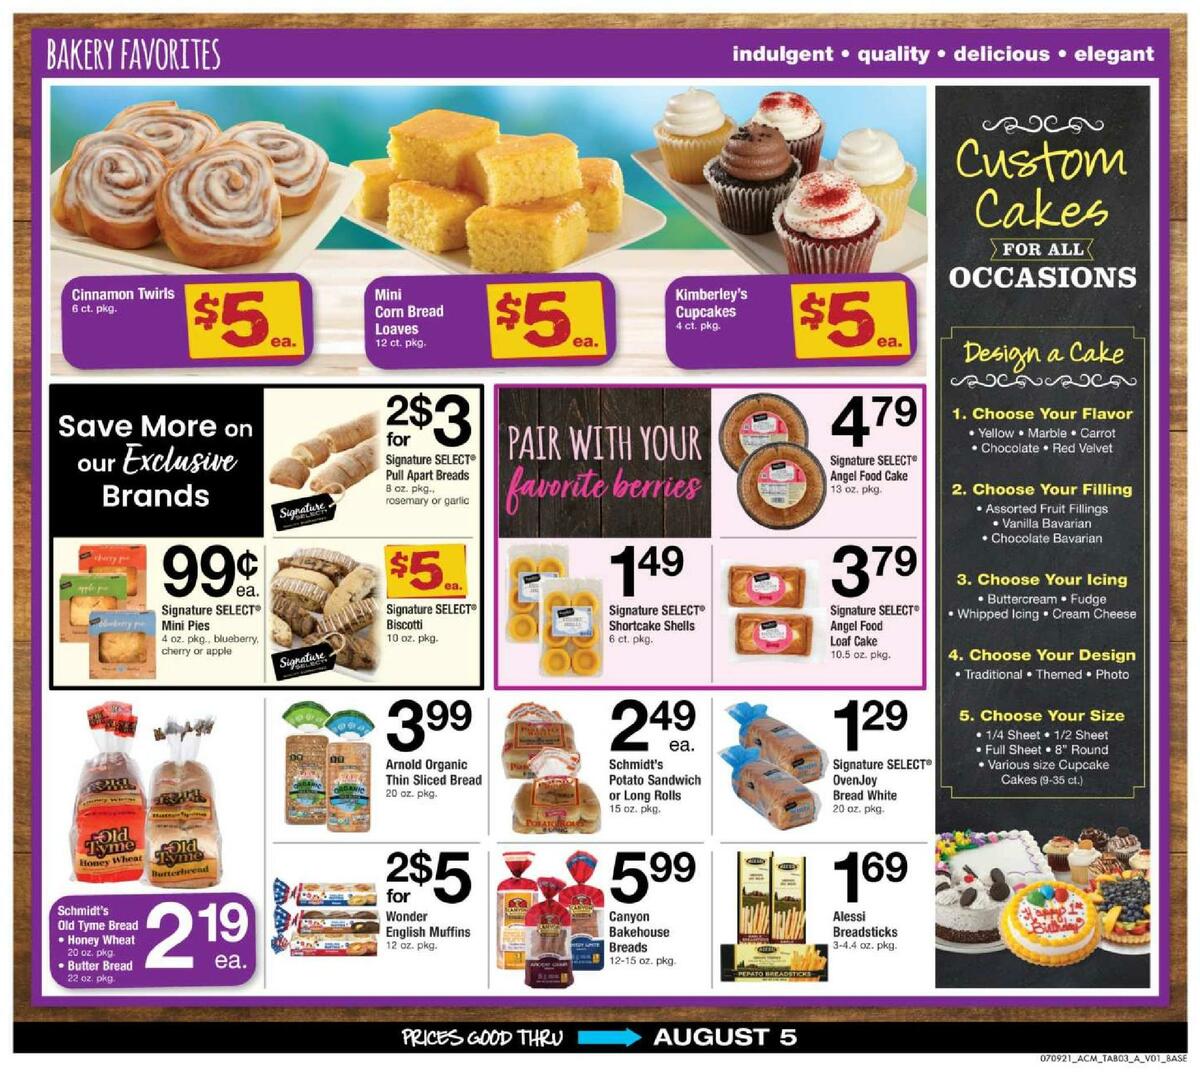 ACME Markets Big Book of Savings Weekly Ad from July 9